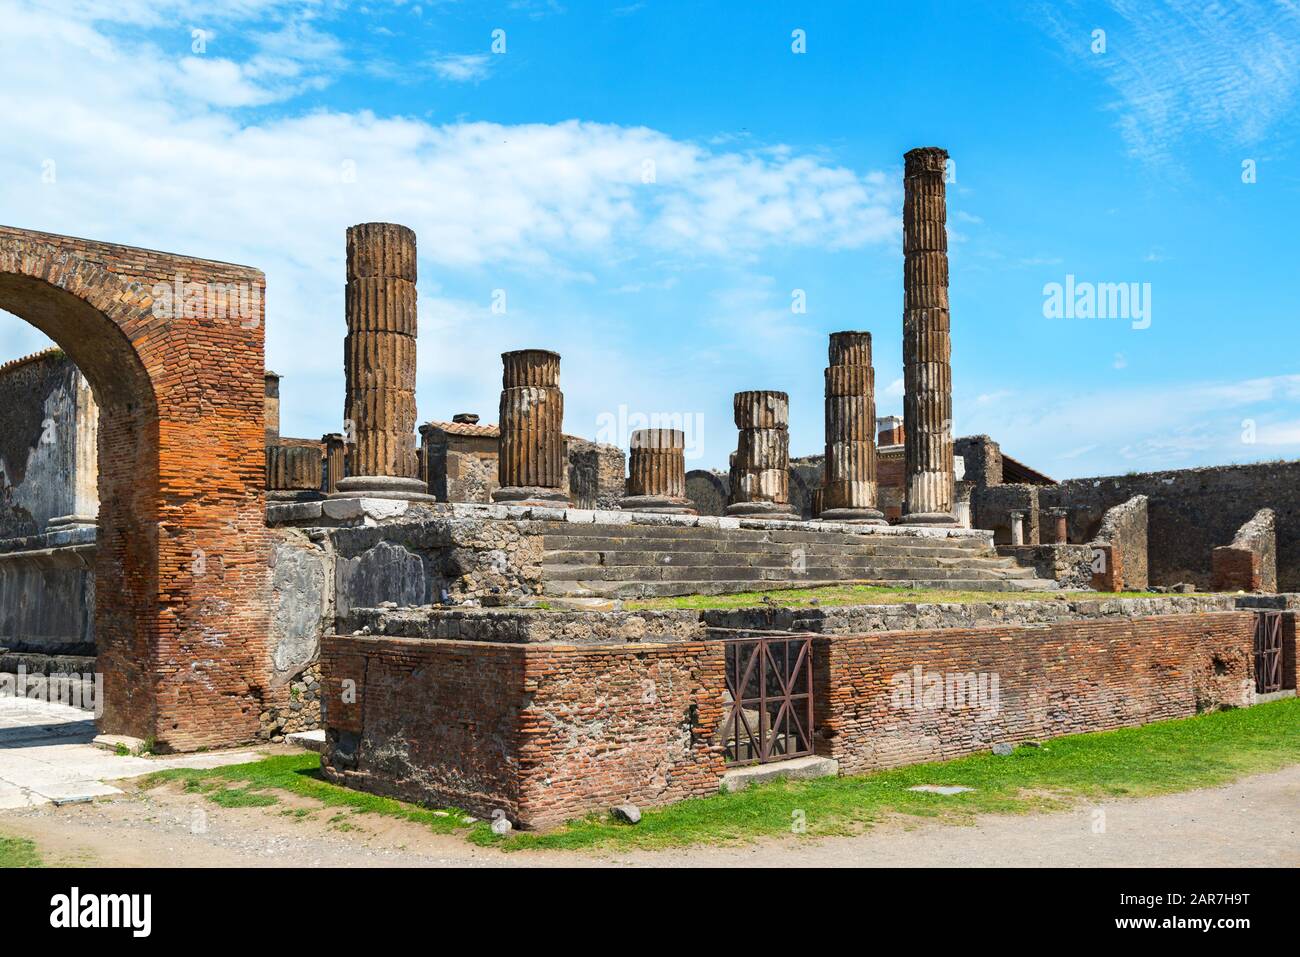 The ruins of the Temple of Jupiter Pompeii, Italy. Pompeii is an ancient Roman city died from the eruption of Mount Vesuvius in 79 AD. Stock Photo